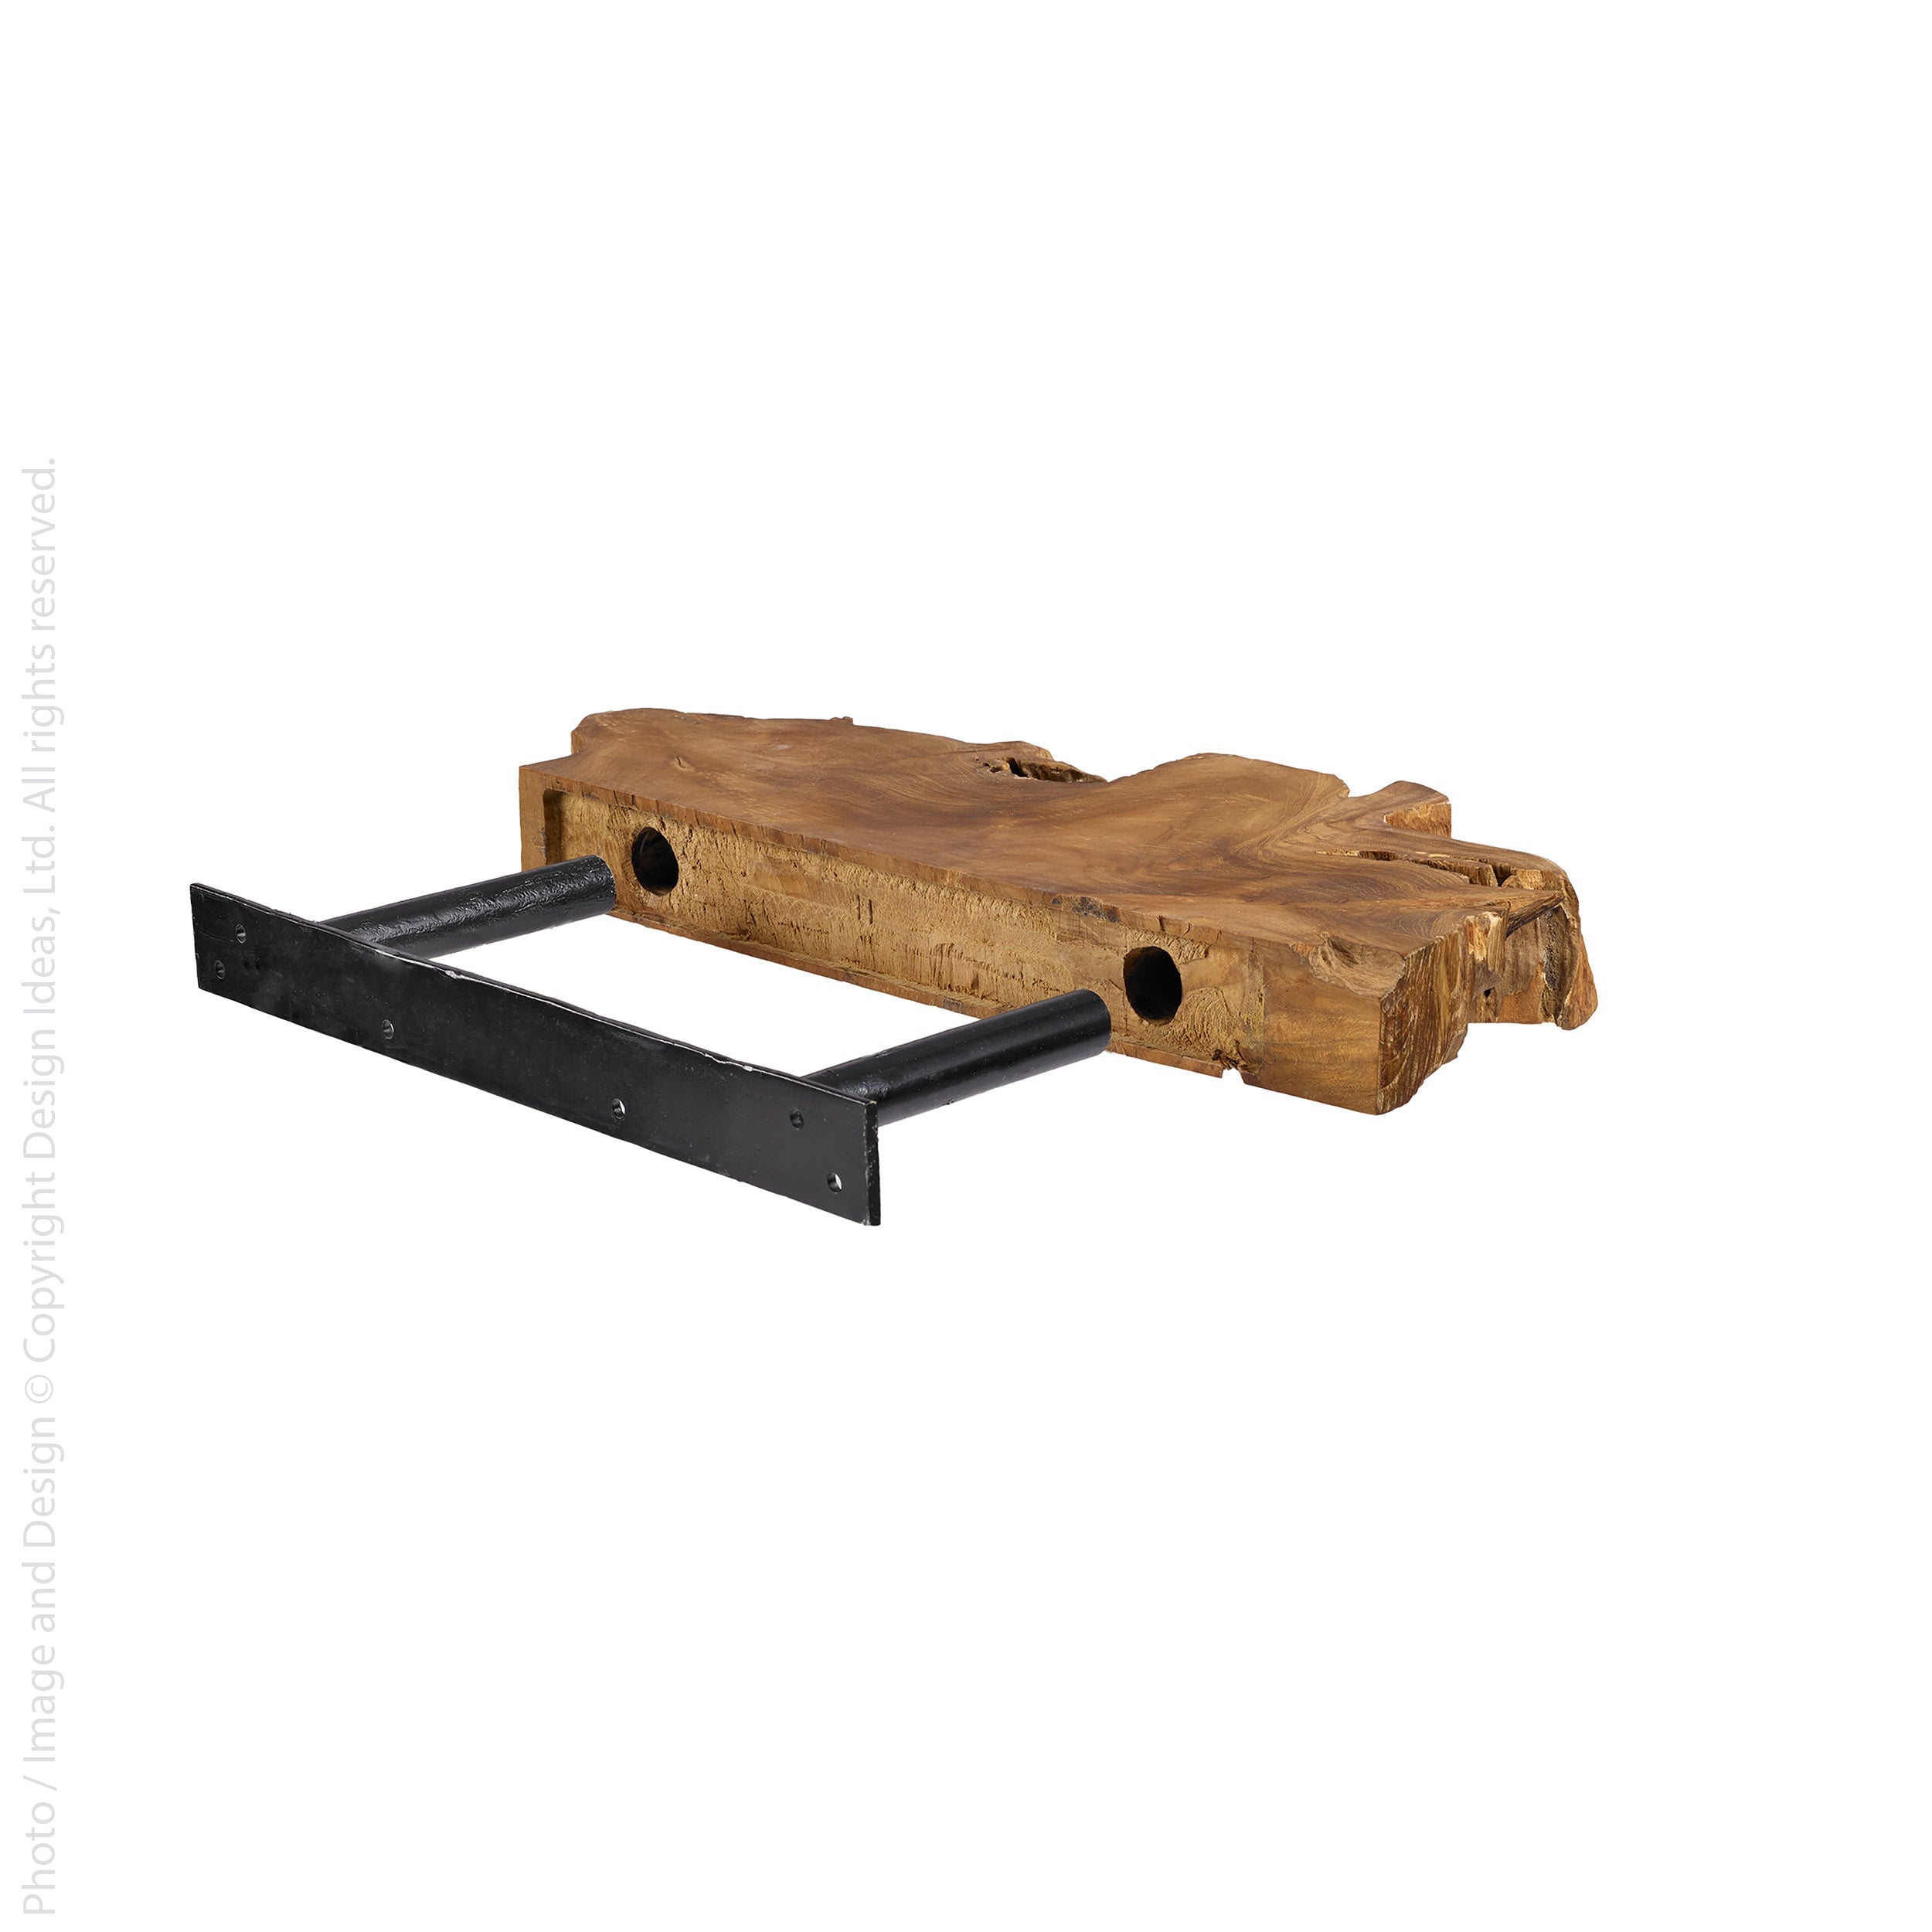 Takara Teak Live Edge Shelf (Medium) Natural Color | Image 4 | From the Takara Collection | Elegantly assembled with natural teak for long lasting use | This shelf is sustainably sourced | Available in natural color | texxture home